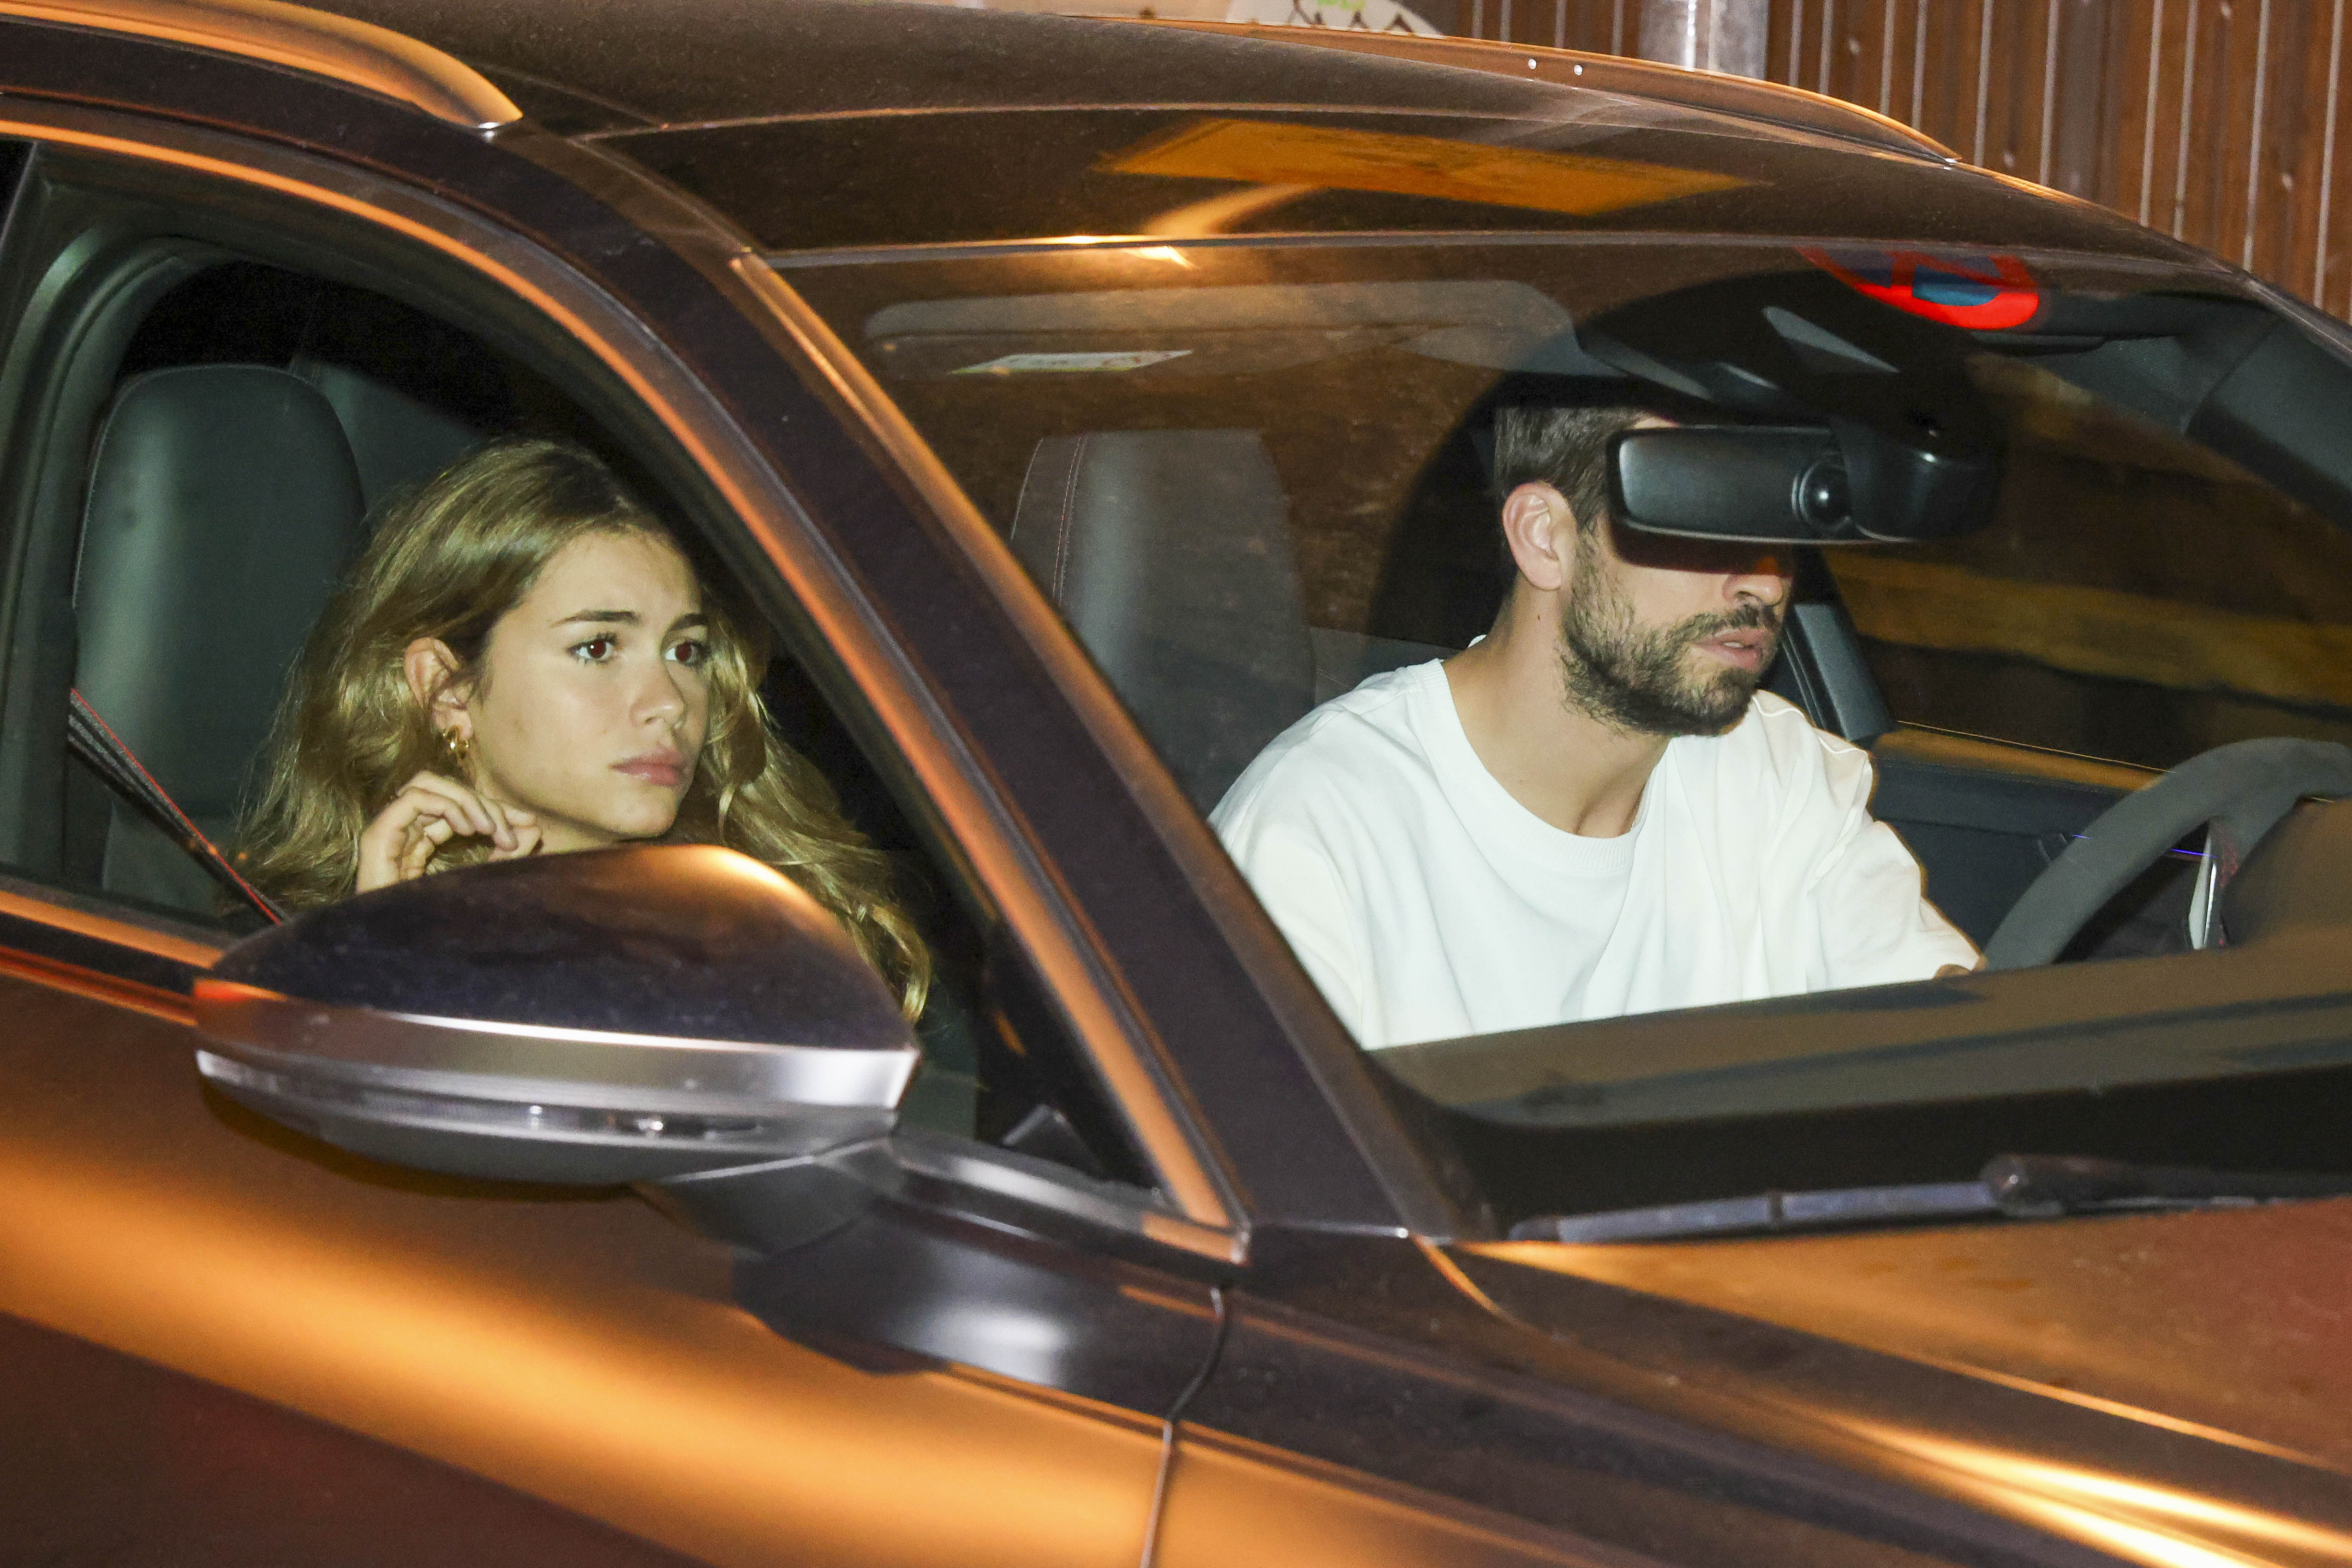 Photo © 2022 G3/The Grosby Group Barcelona, ​​​​Spain.  November 10, 2022. Gerard Piqué arrives at a Kosmos event in Barcelona accompanied by his girlfriend, Clara Chía Martí.  The footballer and the young woman arrived in the Spanish player's vehicle and kept a low profile.  Piqué looks casual with a wide white t-shirt and jeans of the same style.  Shakira's ex of hers appears after finally establishing an agreement with the mother of her children for their custody of her.  Apparently, Sasha and Milan (children of Shakira and Piqué) will move to Miami with their mother by the end of 2022. And rumors indicate that the footballer could live with them for a while since he currently has no sports commitments in Spain.  *** Gerard Piqué arrives at a Kosmos event in Barcelona accompanied by his girlfriend, Clara Chía Martí.  The footballer and the young woman arrived in the Spanish player's vehicle and kept a low profile.  Piqué looks casual with a wide white T-shirt and jeans of the same style.  Shakira's ex appears after finally establishing an agreement with the mother of her children for their custody.  Apparently, Sasha and Milán (children of Shakira and Piqué) will move to Miami with his mother by the end of 2022. And rumors indicate that the footballer could live with them for a while since he currently has no sports commitments in Spain.